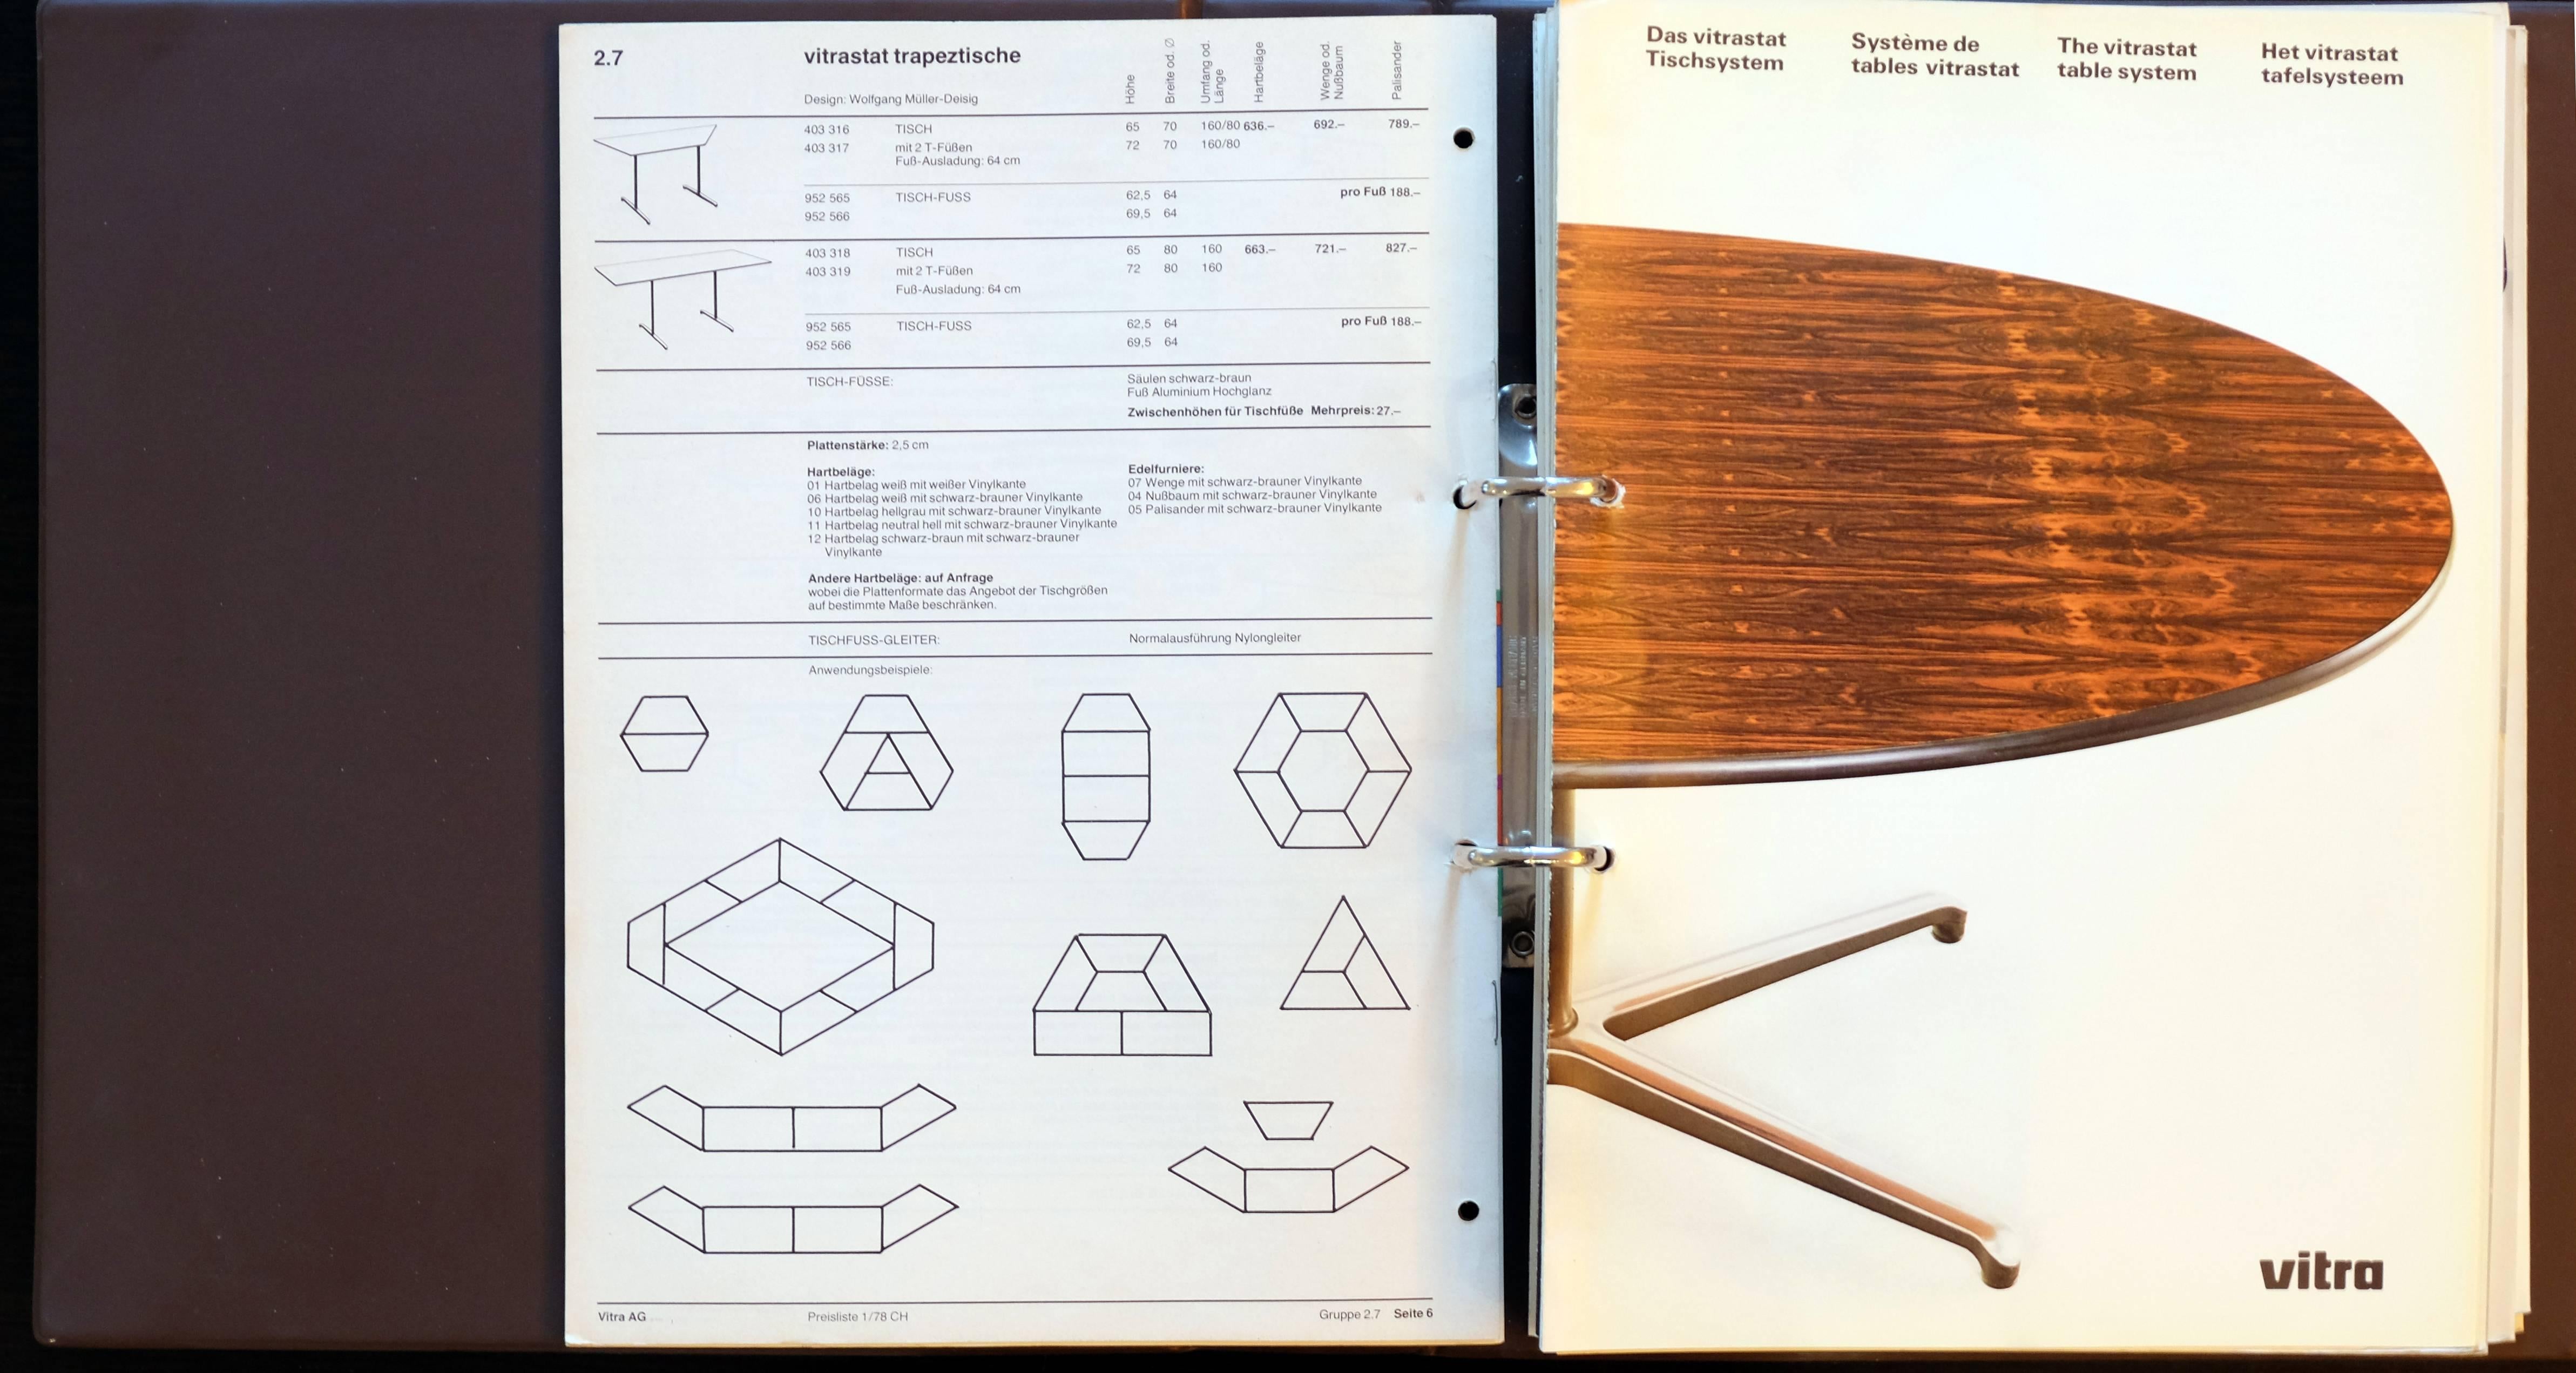 Swiss Herman Miller International Collection and Vitra, 1978 Dealer's Catalogue